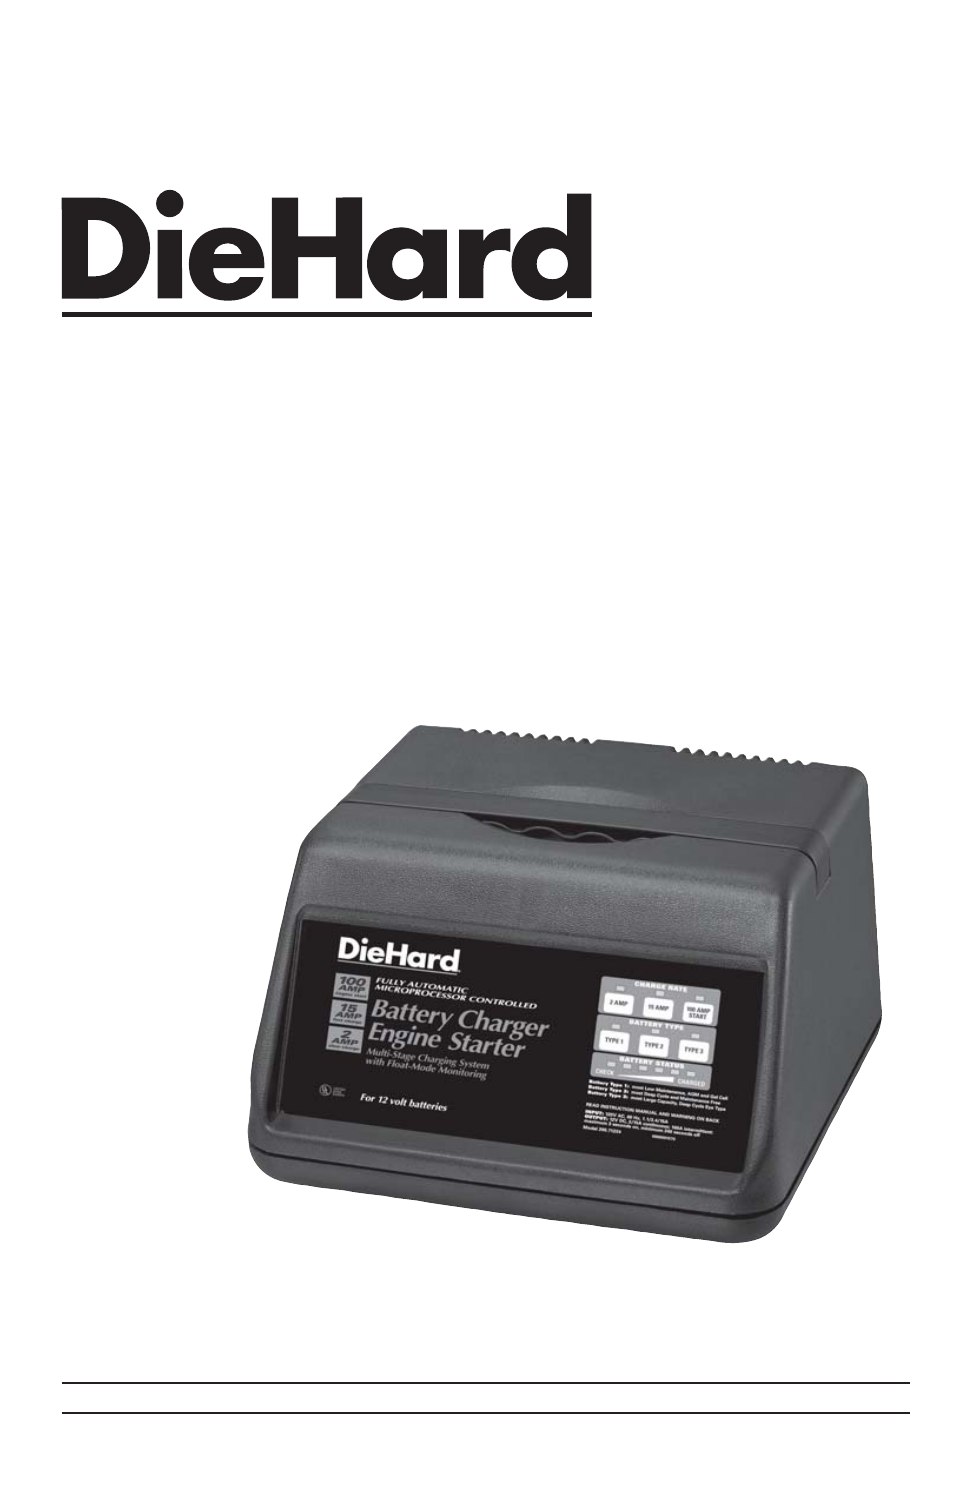 Die hard 10 amp manual battery charger